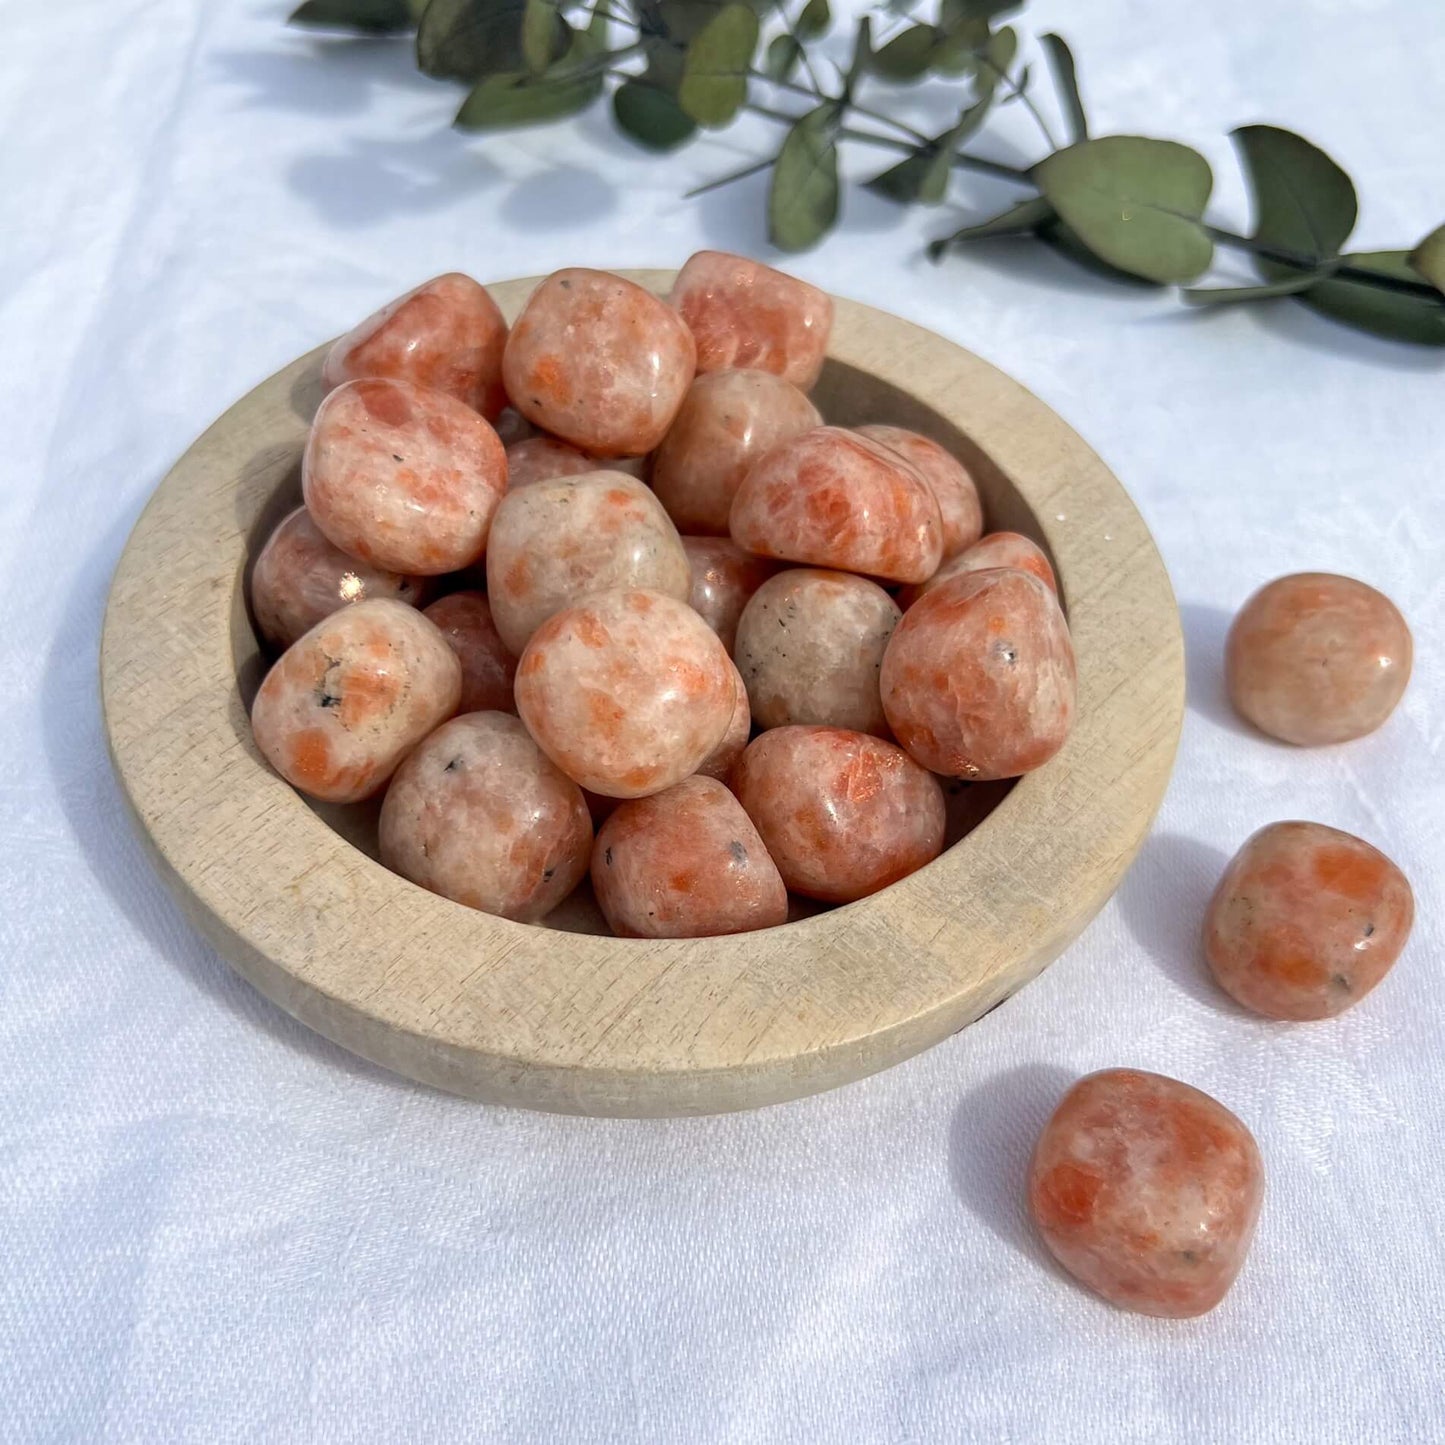 Bright and cheerful orange coloured sunstone crystal tumble stones spilling from a wooden dish